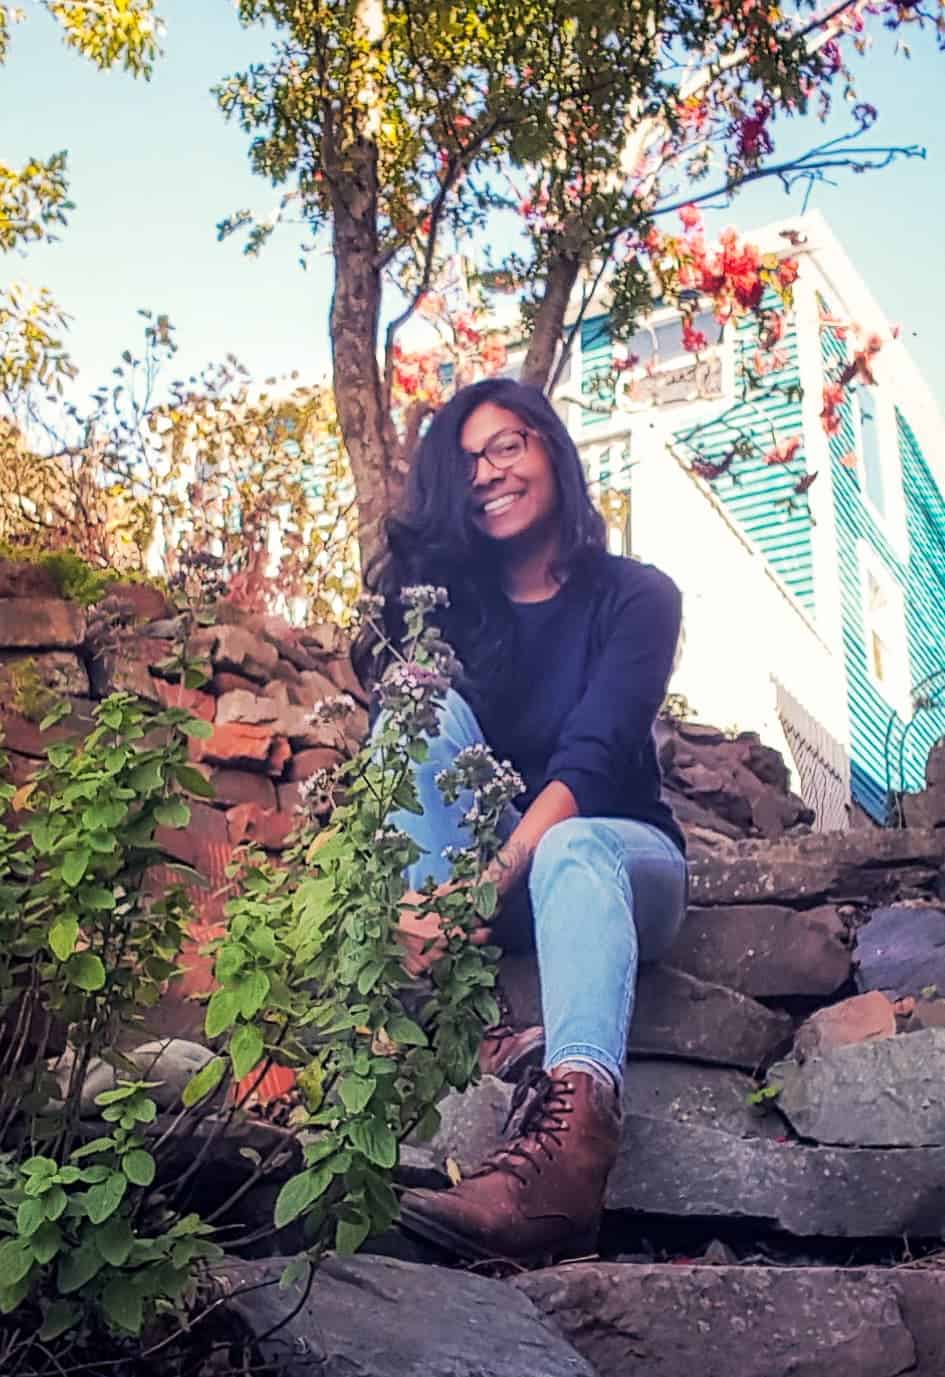 Ruha is wearing a navy sweater, jeans and brown boots, sitting on worn stone steps in a fall garden